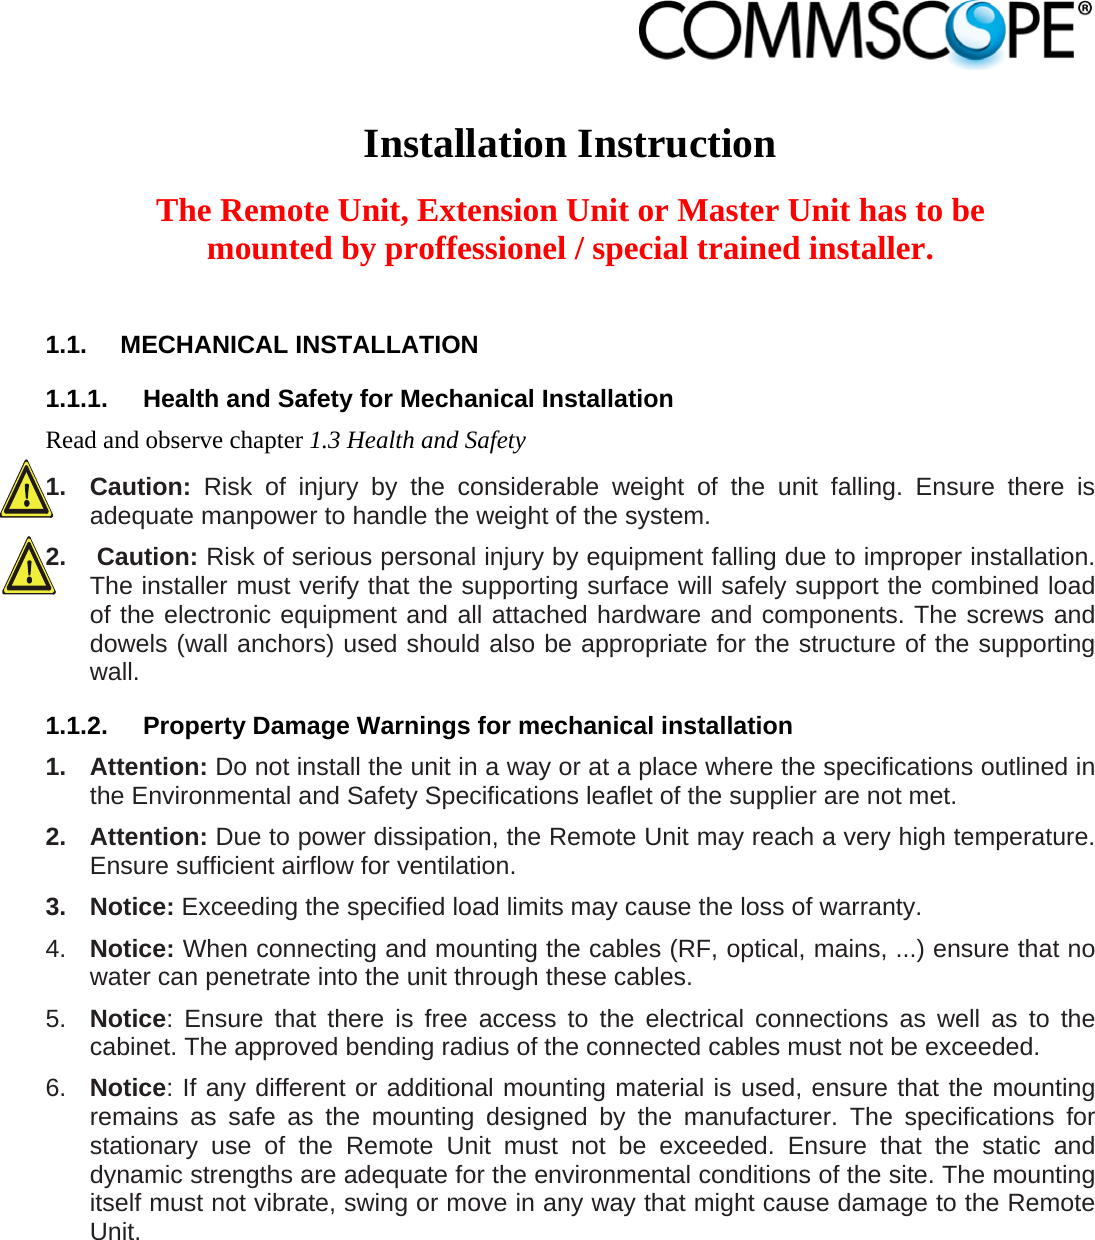                             Installation Instruction  The Remote Unit, Extension Unit or Master Unit has to be mounted by proffessionel / special trained installer.  1.1. MECHANICAL INSTALLATION 1.1.1.  Health and Safety for Mechanical Installation Read and observe chapter 1.3 Health and Safety 1. Caution: Risk of injury by the considerable weight of the unit falling. Ensure there is adequate manpower to handle the weight of the system. 2.   Caution: Risk of serious personal injury by equipment falling due to improper installation. The installer must verify that the supporting surface will safely support the combined load of the electronic equipment and all attached hardware and components. The screws and dowels (wall anchors) used should also be appropriate for the structure of the supporting wall. 1.1.2.  Property Damage Warnings for mechanical installation 1. Attention: Do not install the unit in a way or at a place where the specifications outlined in the Environmental and Safety Specifications leaflet of the supplier are not met. 2. Attention: Due to power dissipation, the Remote Unit may reach a very high temperature. Ensure sufficient airflow for ventilation. 3. Notice: Exceeding the specified load limits may cause the loss of warranty. 4.  Notice: When connecting and mounting the cables (RF, optical, mains, ...) ensure that no water can penetrate into the unit through these cables. 5.  Notice: Ensure that there is free access to the electrical connections as well as to the cabinet. The approved bending radius of the connected cables must not be exceeded.  6.  Notice: If any different or additional mounting material is used, ensure that the mounting remains as safe as the mounting designed by the manufacturer. The specifications for stationary use of the Remote Unit must not be exceeded. Ensure that the static and dynamic strengths are adequate for the environmental conditions of the site. The mounting itself must not vibrate, swing or move in any way that might cause damage to the Remote Unit. 